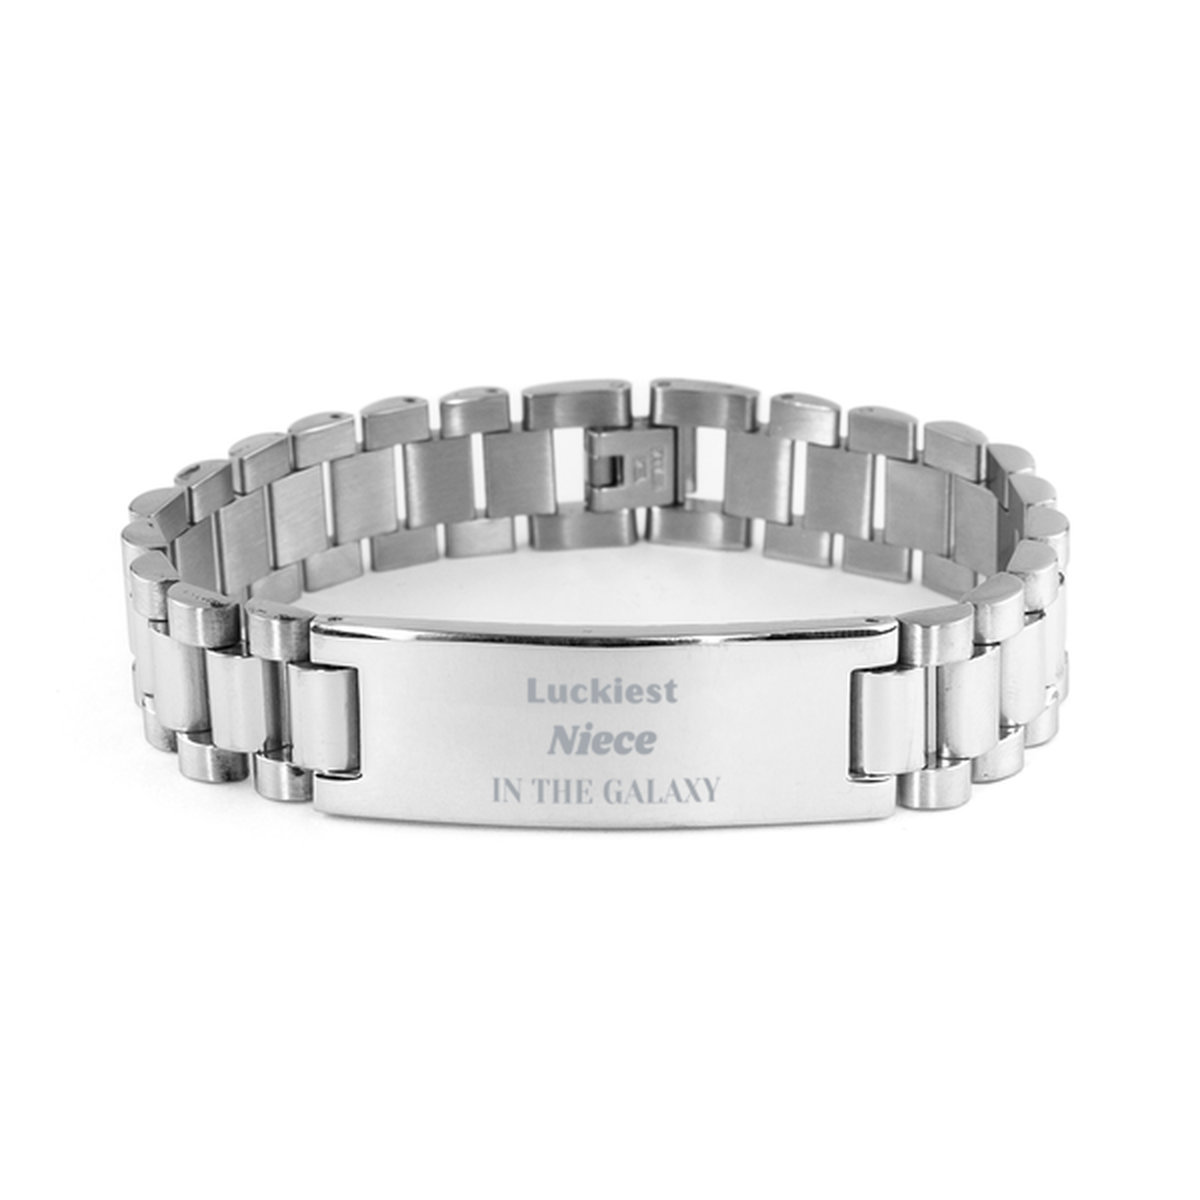 Luckiest Niece in the Galaxy, To My Niece Engraved Gifts, Christmas Niece Ladder Stainless Steel Bracelet Gifts, X-mas Birthday Unique Gifts For Niece Men Women